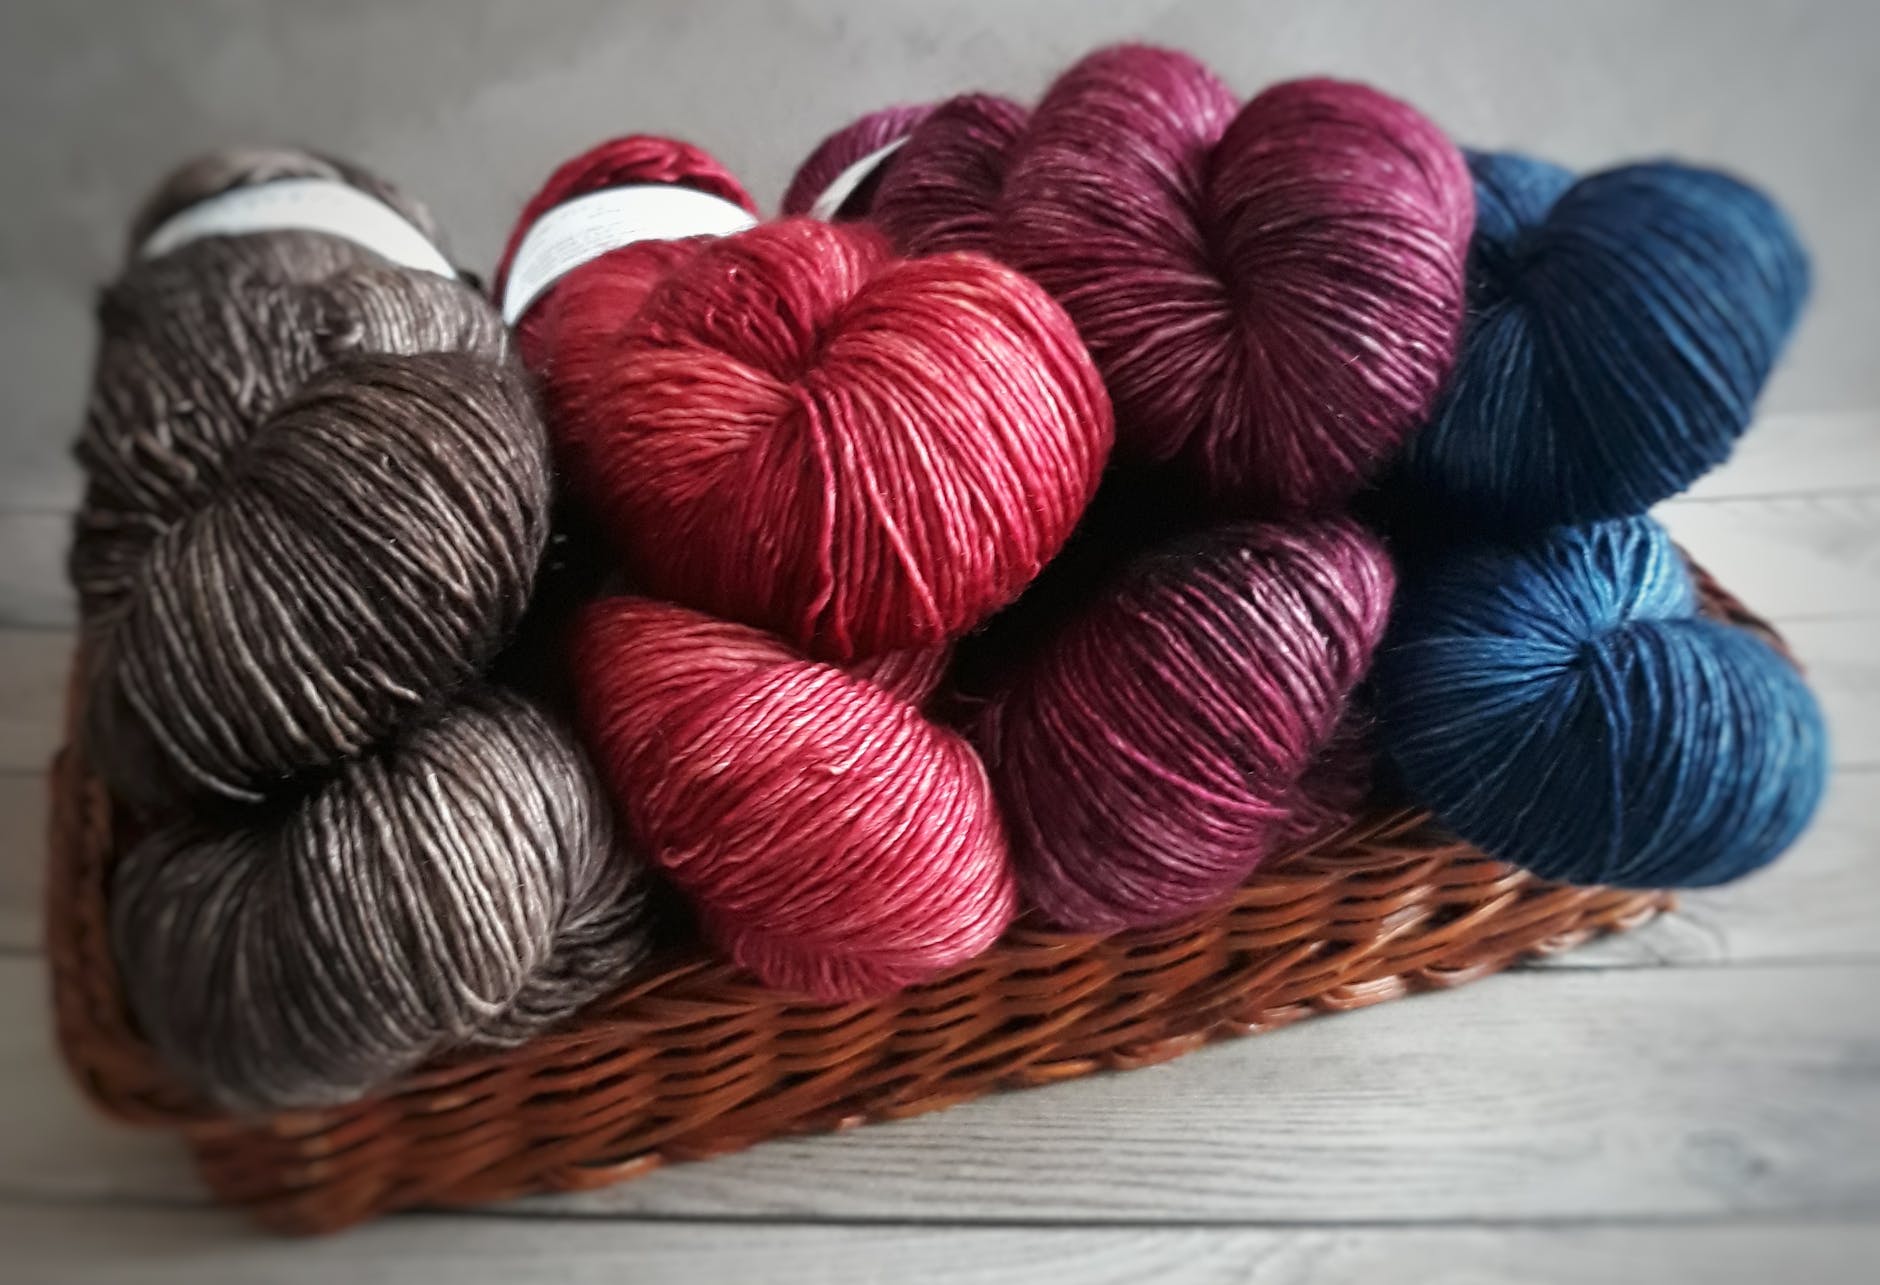 Soft Craft Free Project Downloads